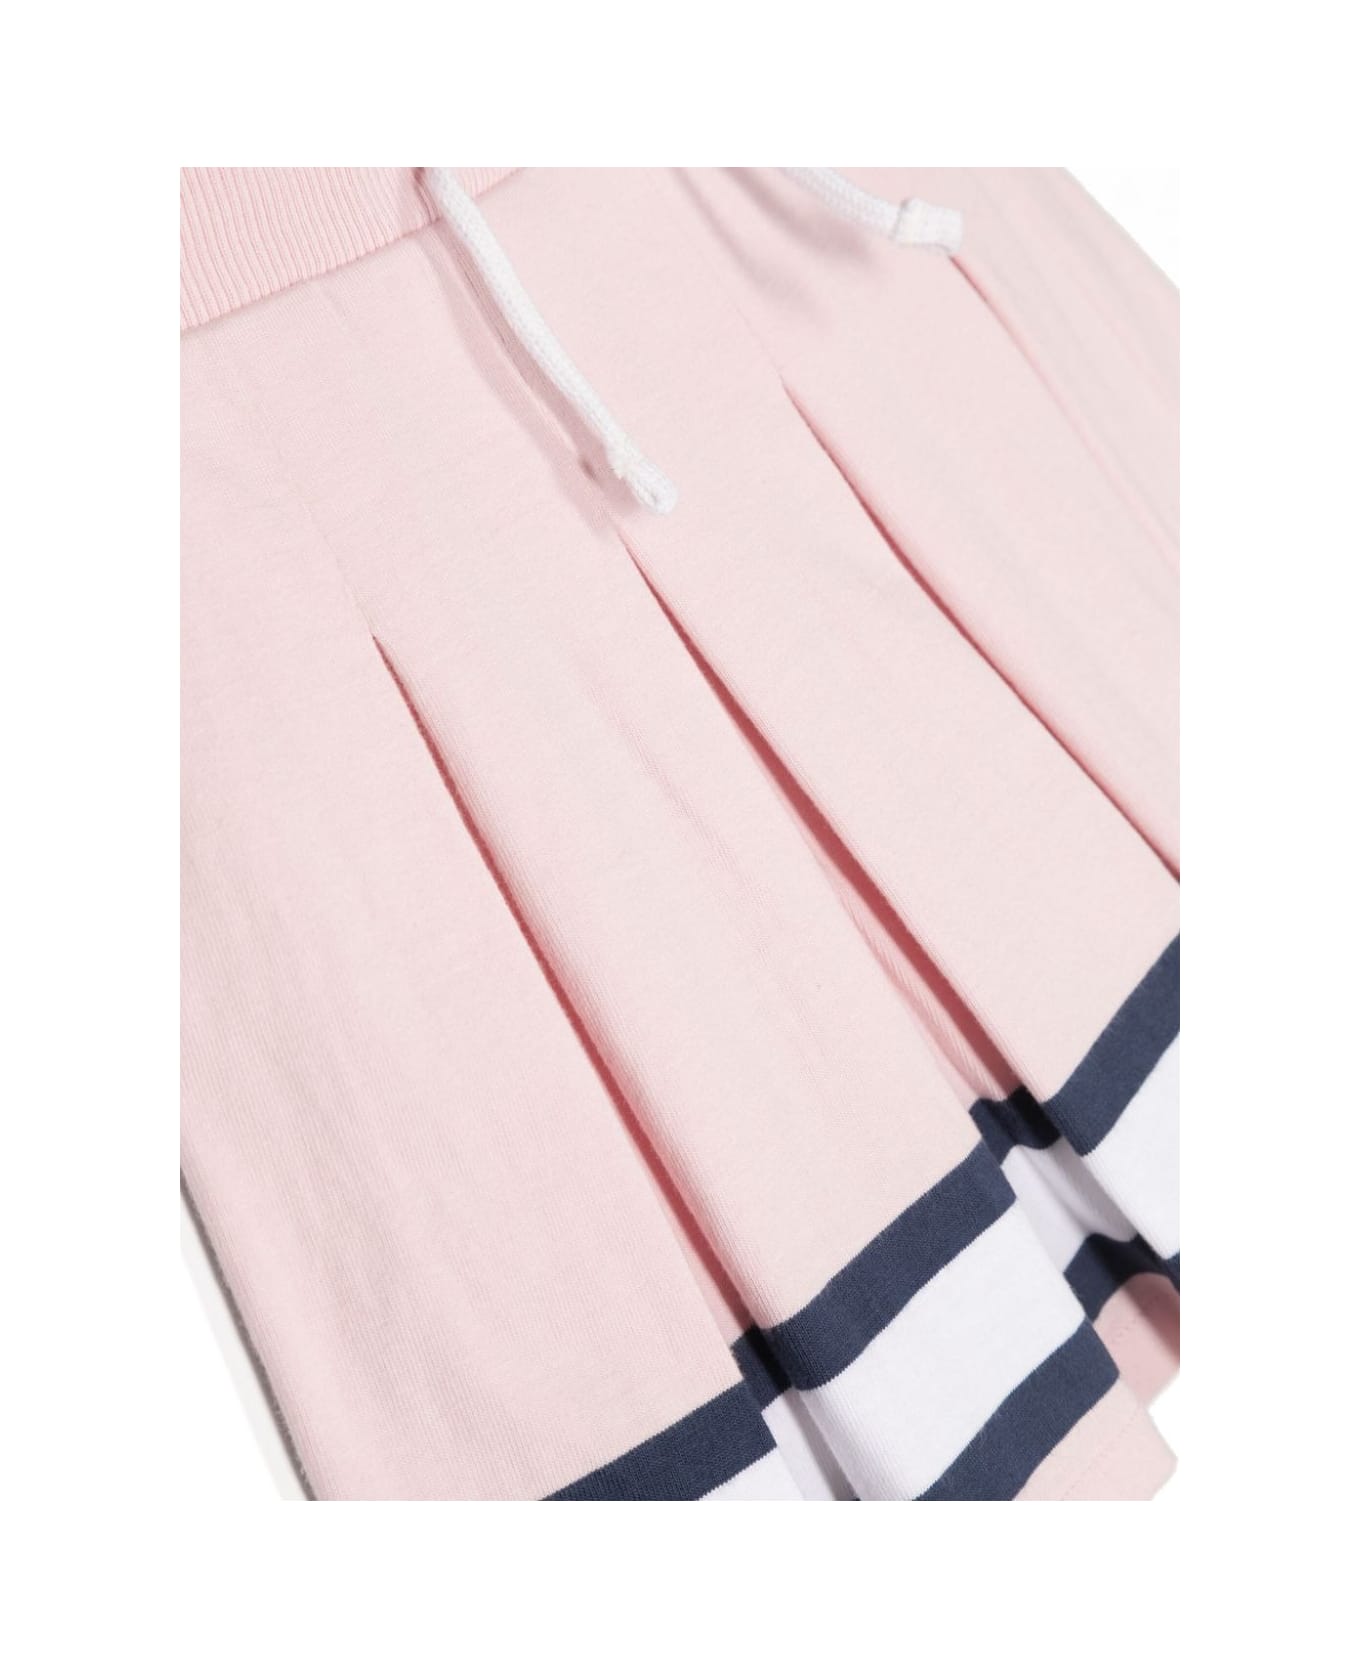 Ralph Lauren Pink Pleated Mini Skirt With Striped Pattern - Pink ボトムス